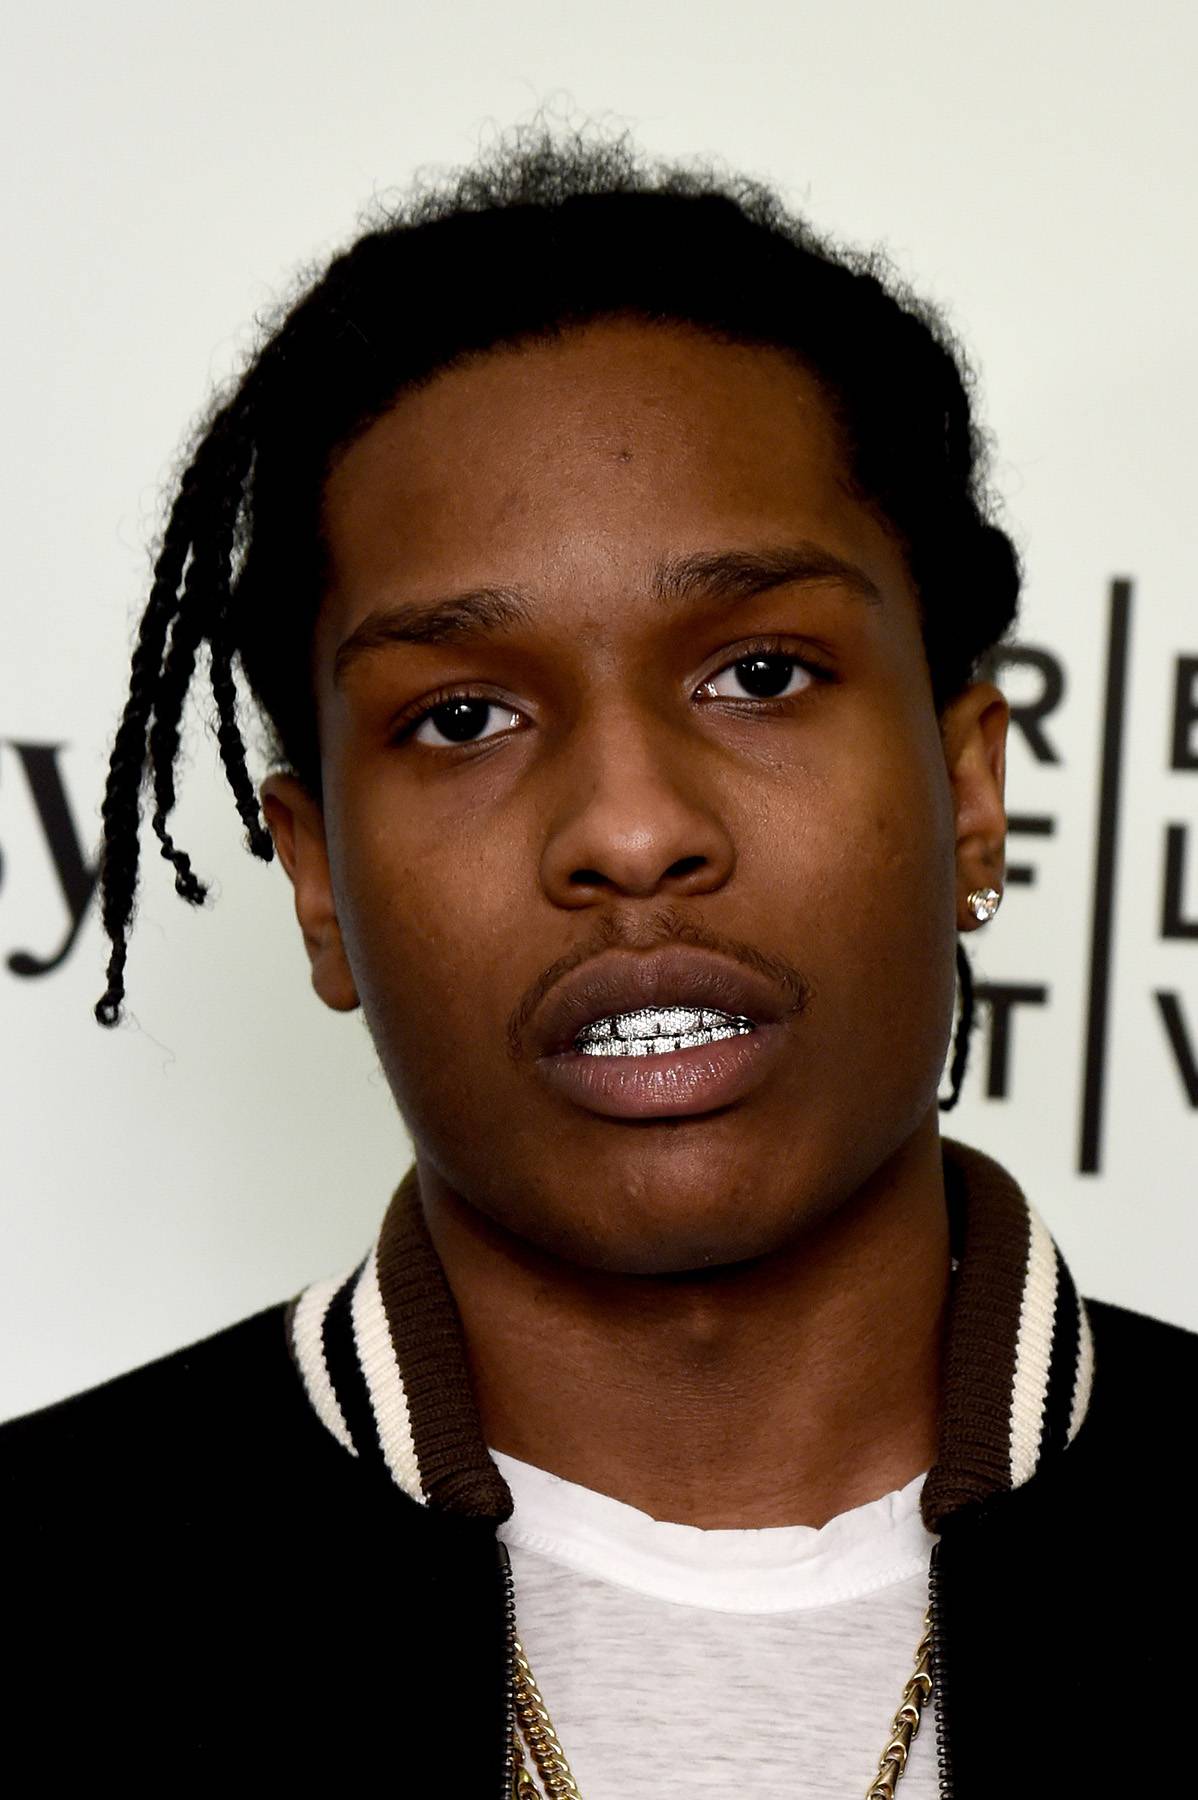 A$AP Rocky - Gay? - Image 17 from 16 Celebrities Unbothered by Gay ...